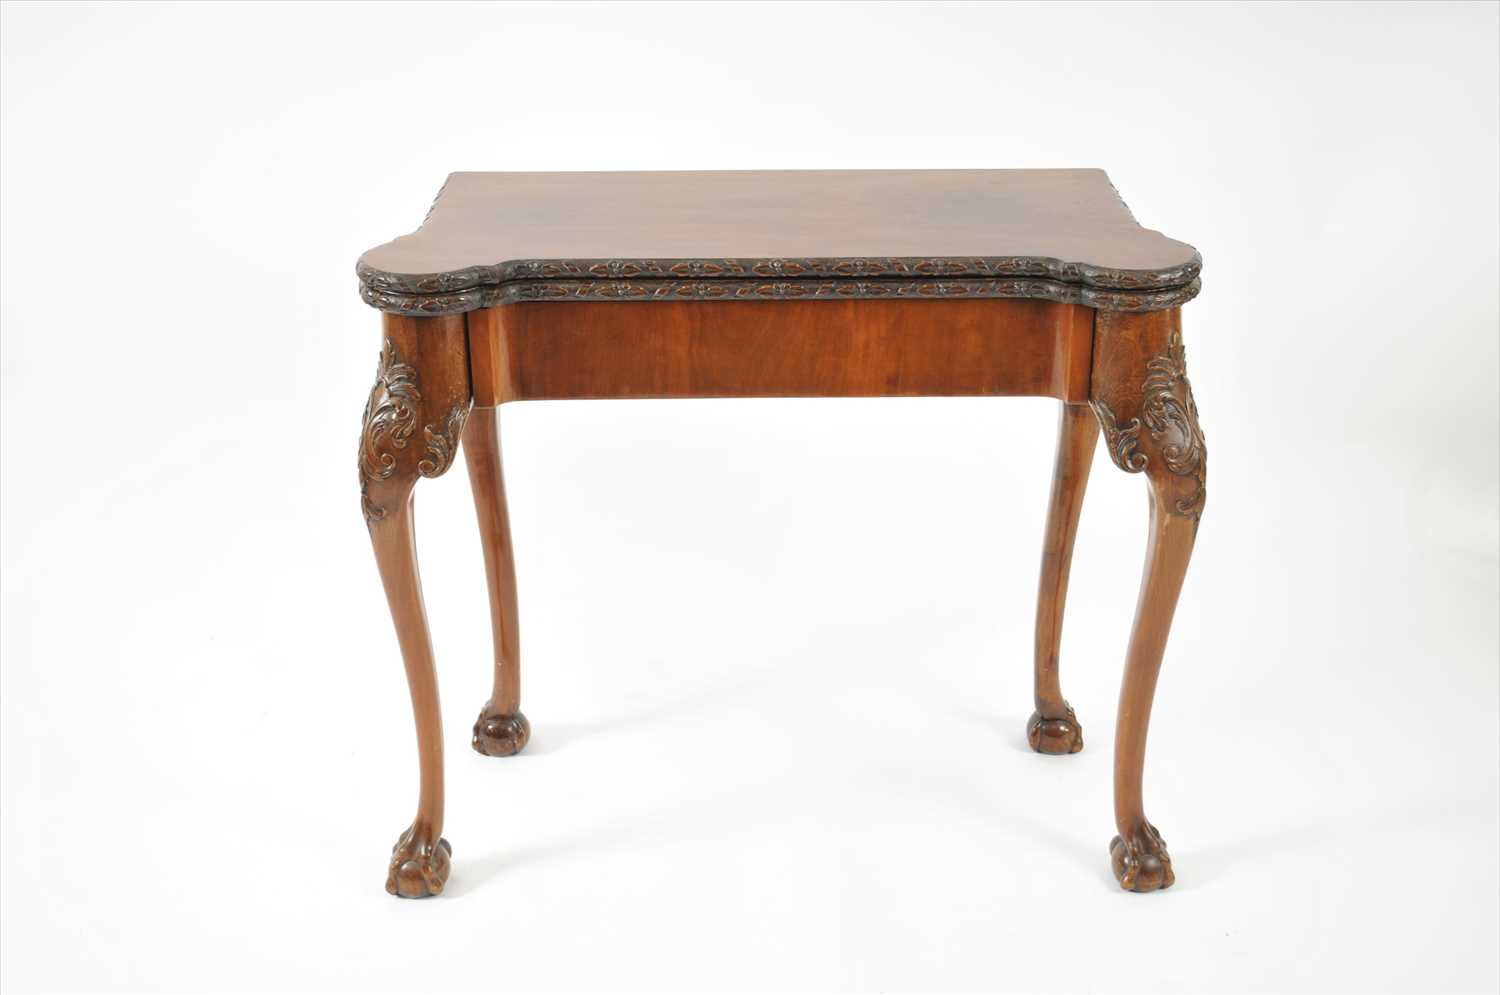 Lot 734 - A 19th century folding mahogany card table in the George II style